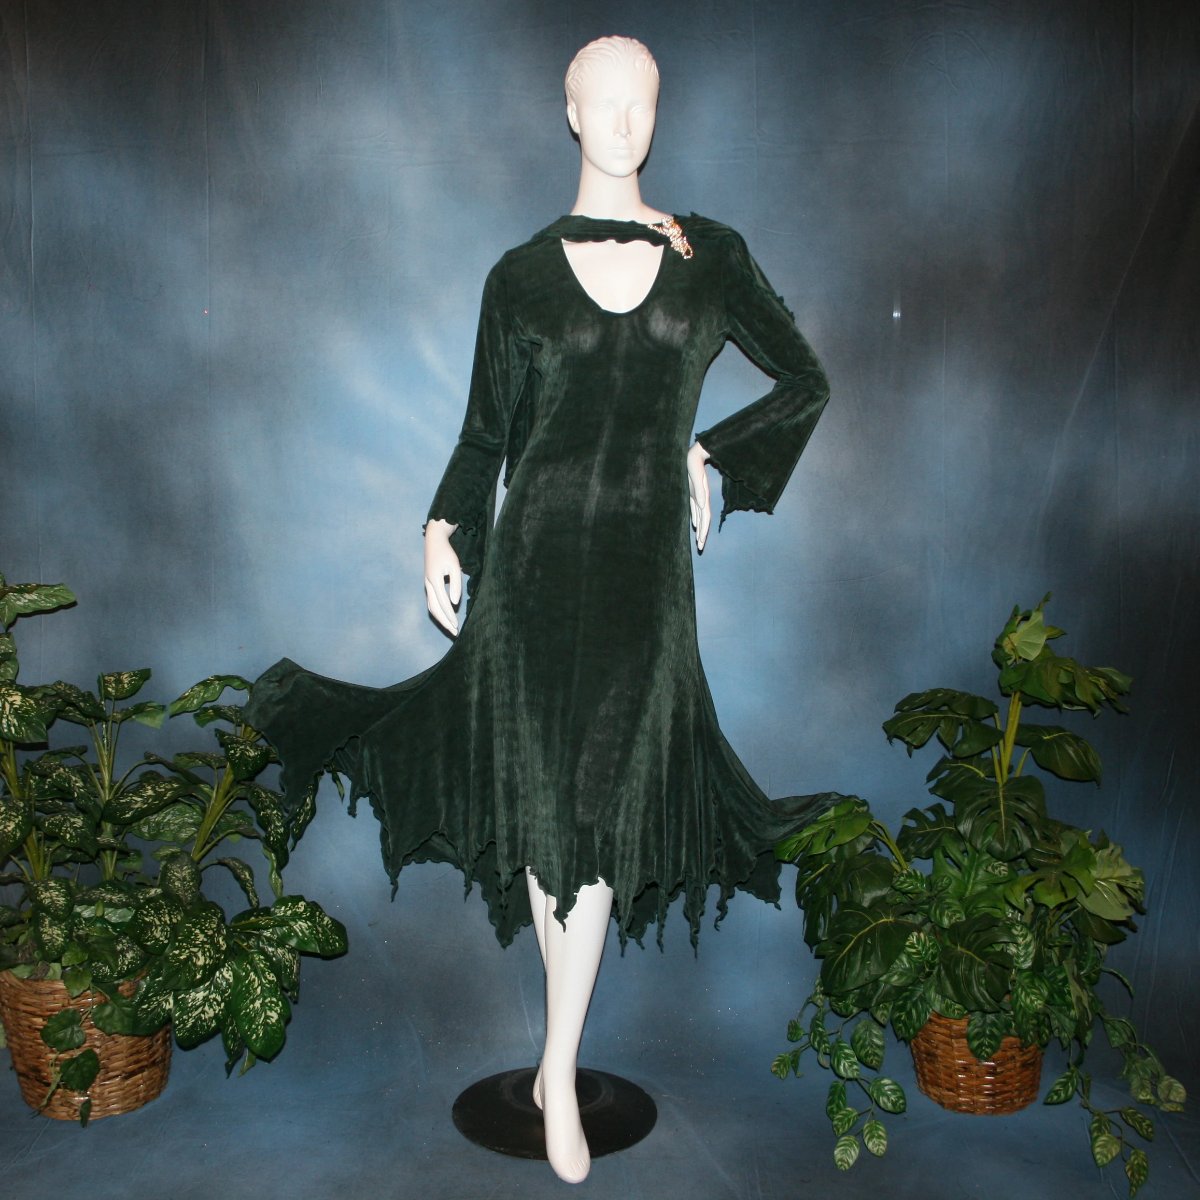 Deep green social ballroom dress created in luxurious solid slinky fabric with attached draping on shoulders & peaked skirt edge. Very full around bottom..can be a beginner ballroom dancer smooth ballroom dress. Broach is not included. This ballroom social dress can be custom created in many colors.